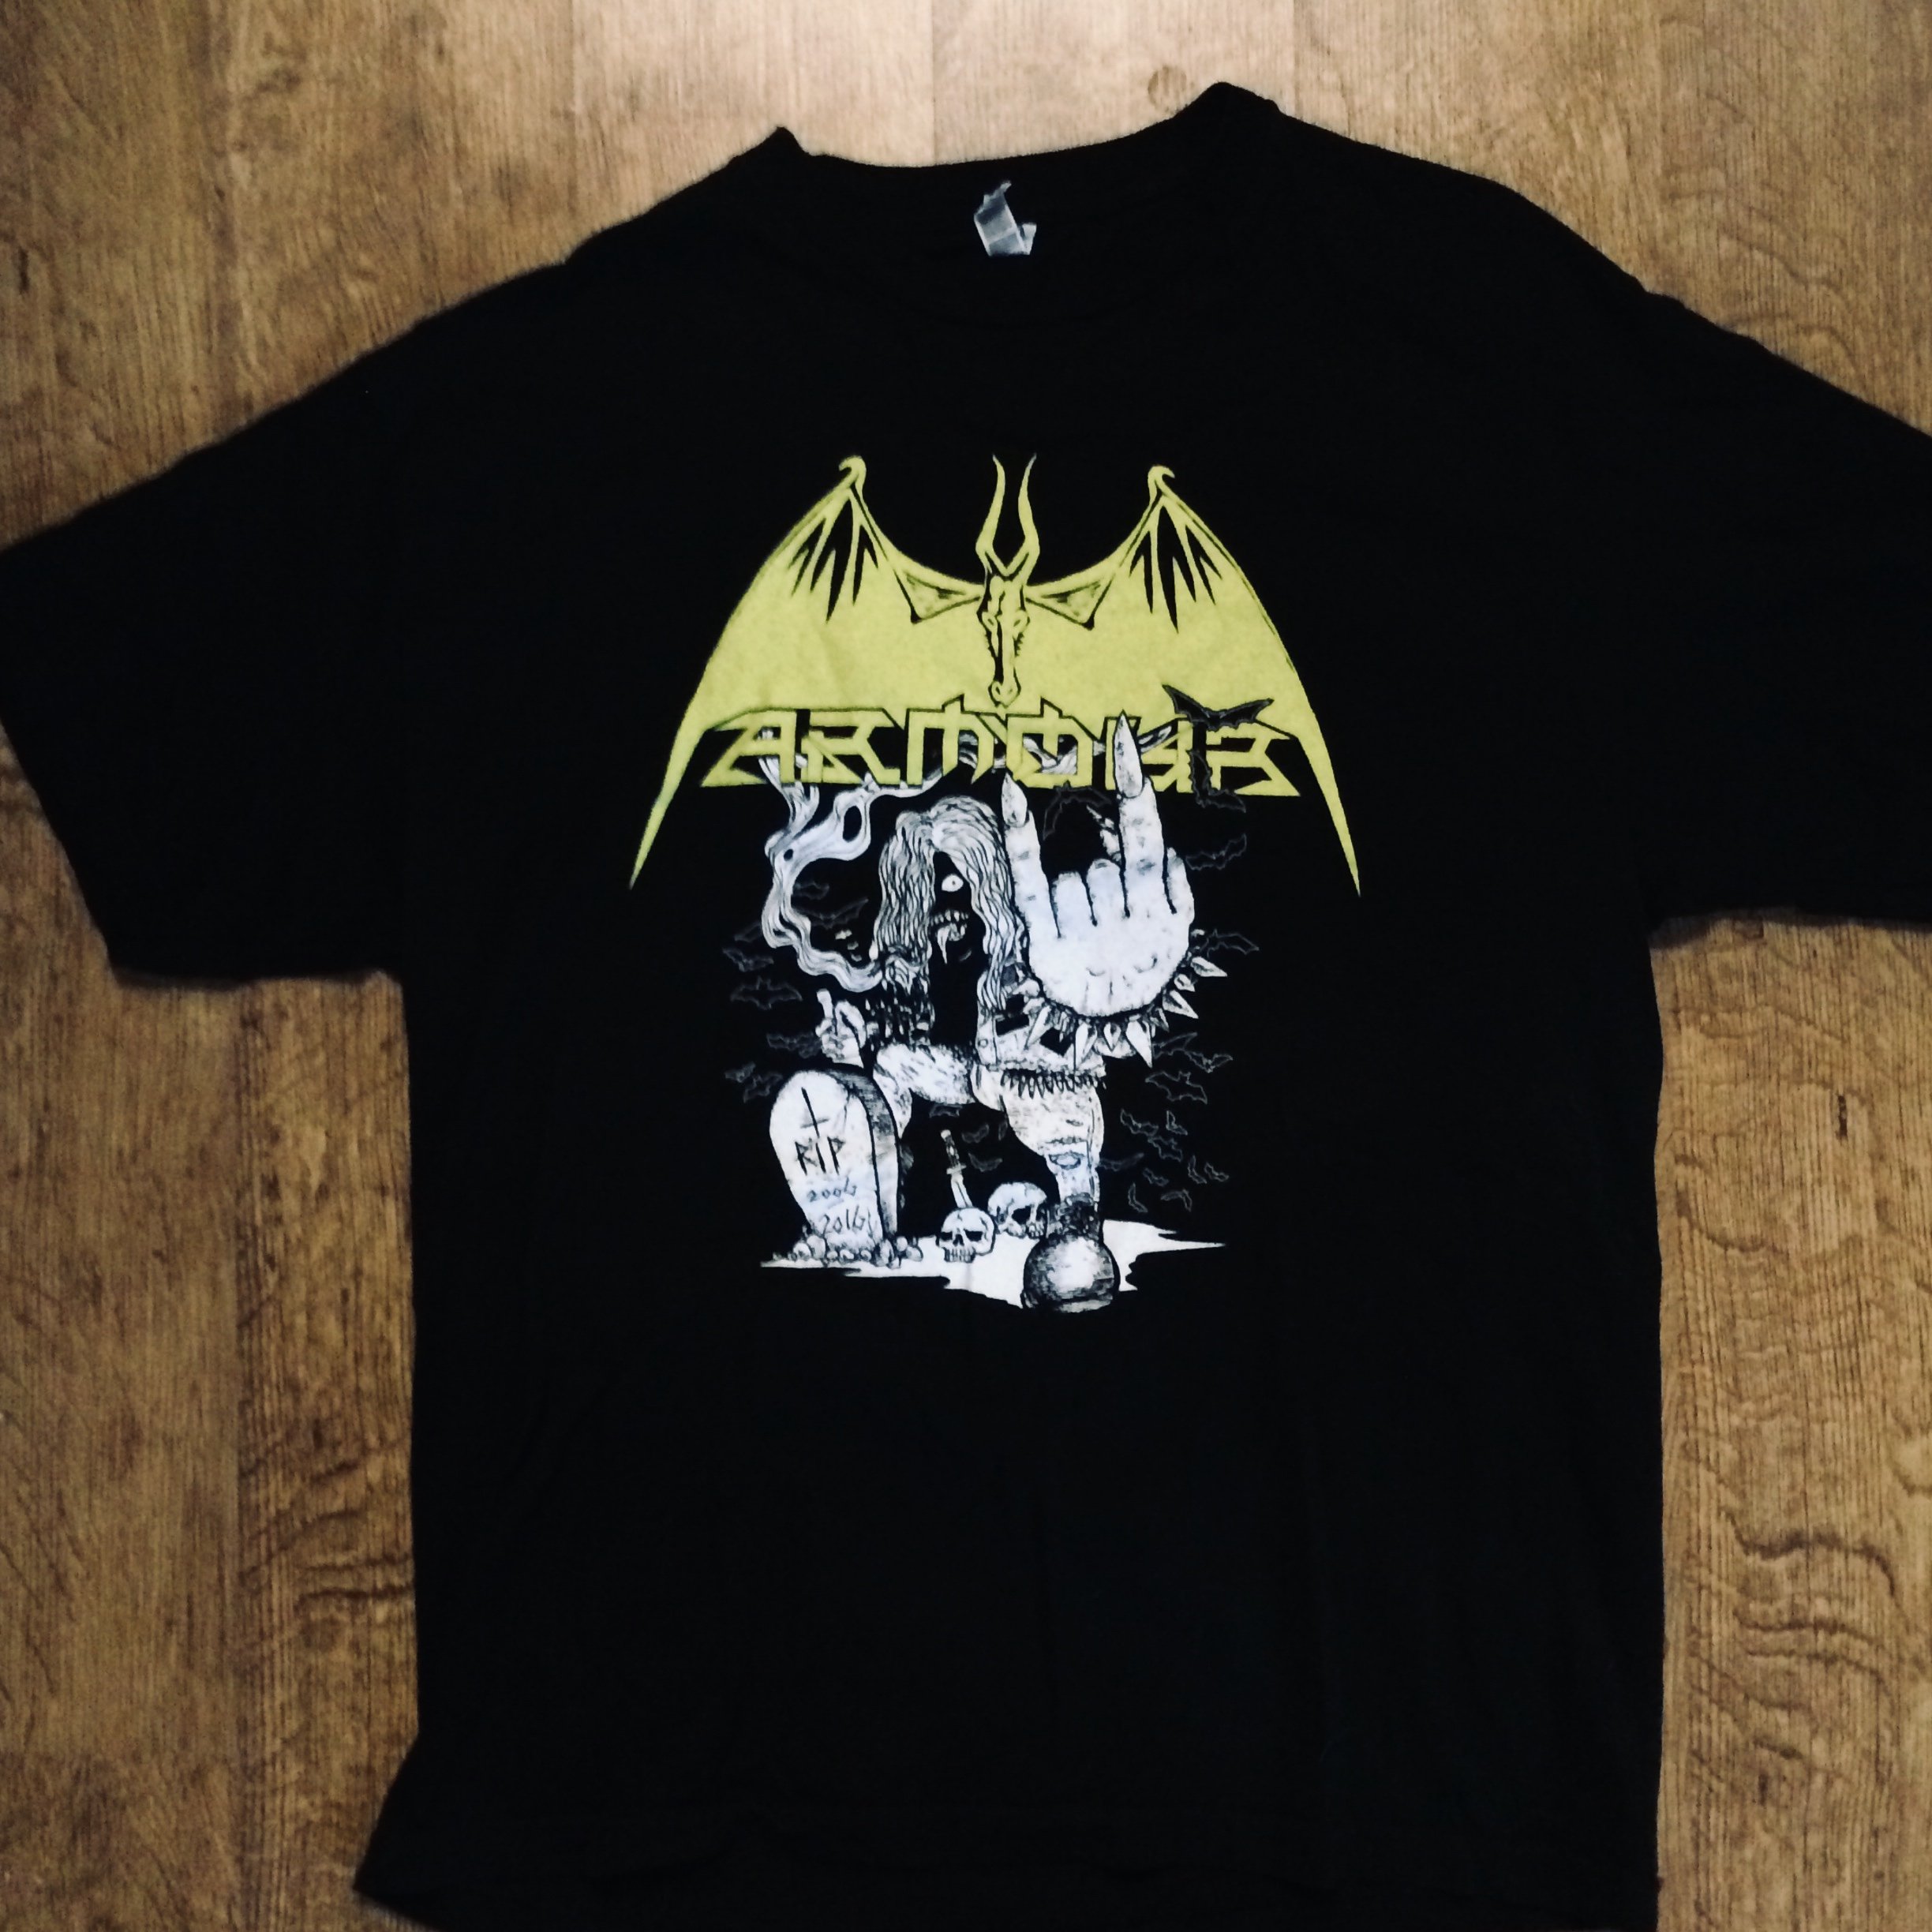 Photo of the Armour - "See You In Valhalla" T-shirt (Black)